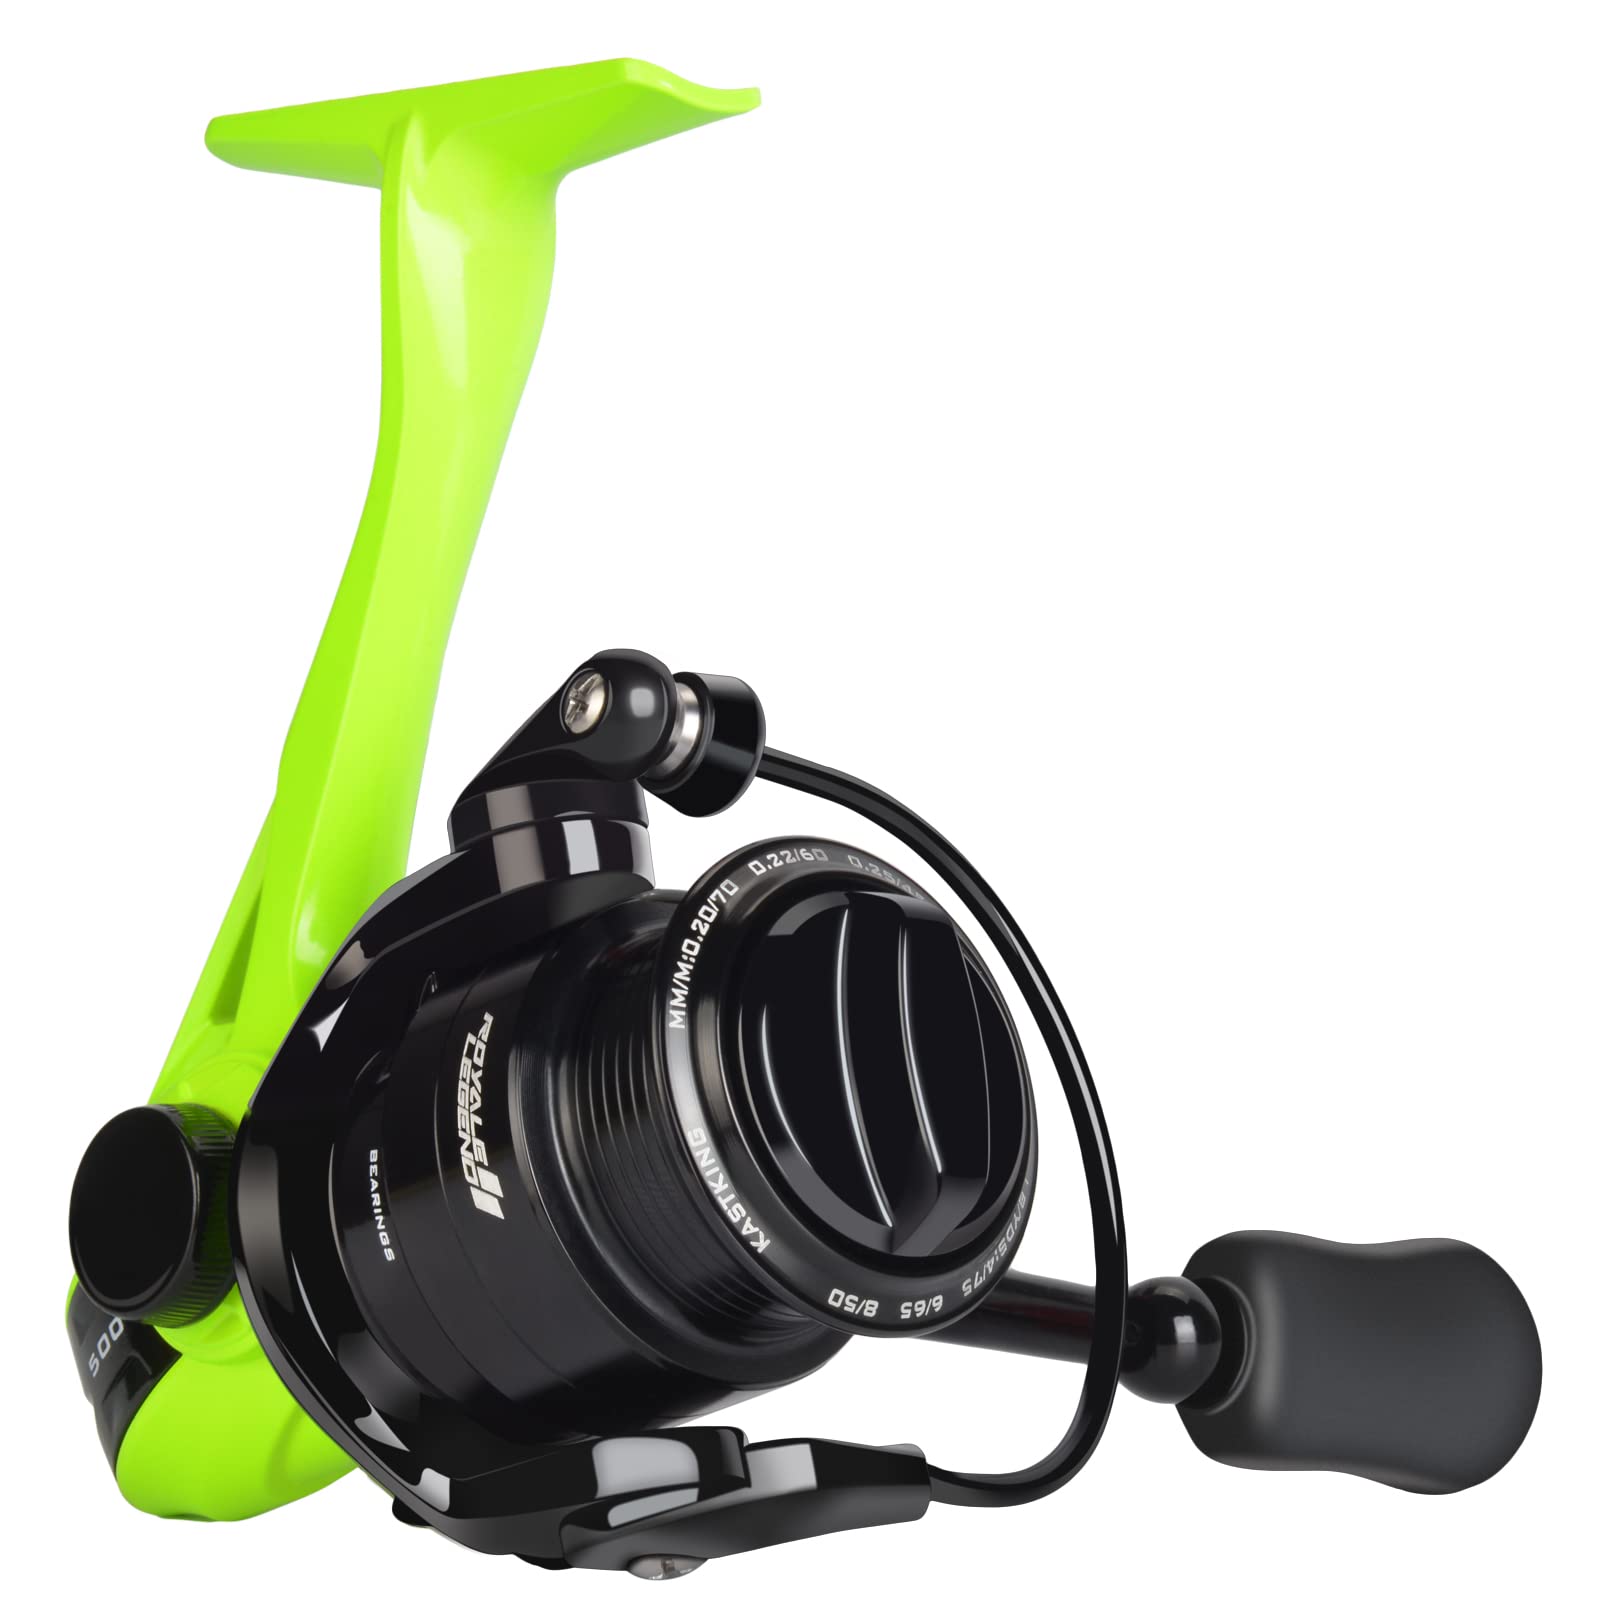 KastKing Royale Charge Spinning Fishing Reel, 5.2:1 High-Speed for